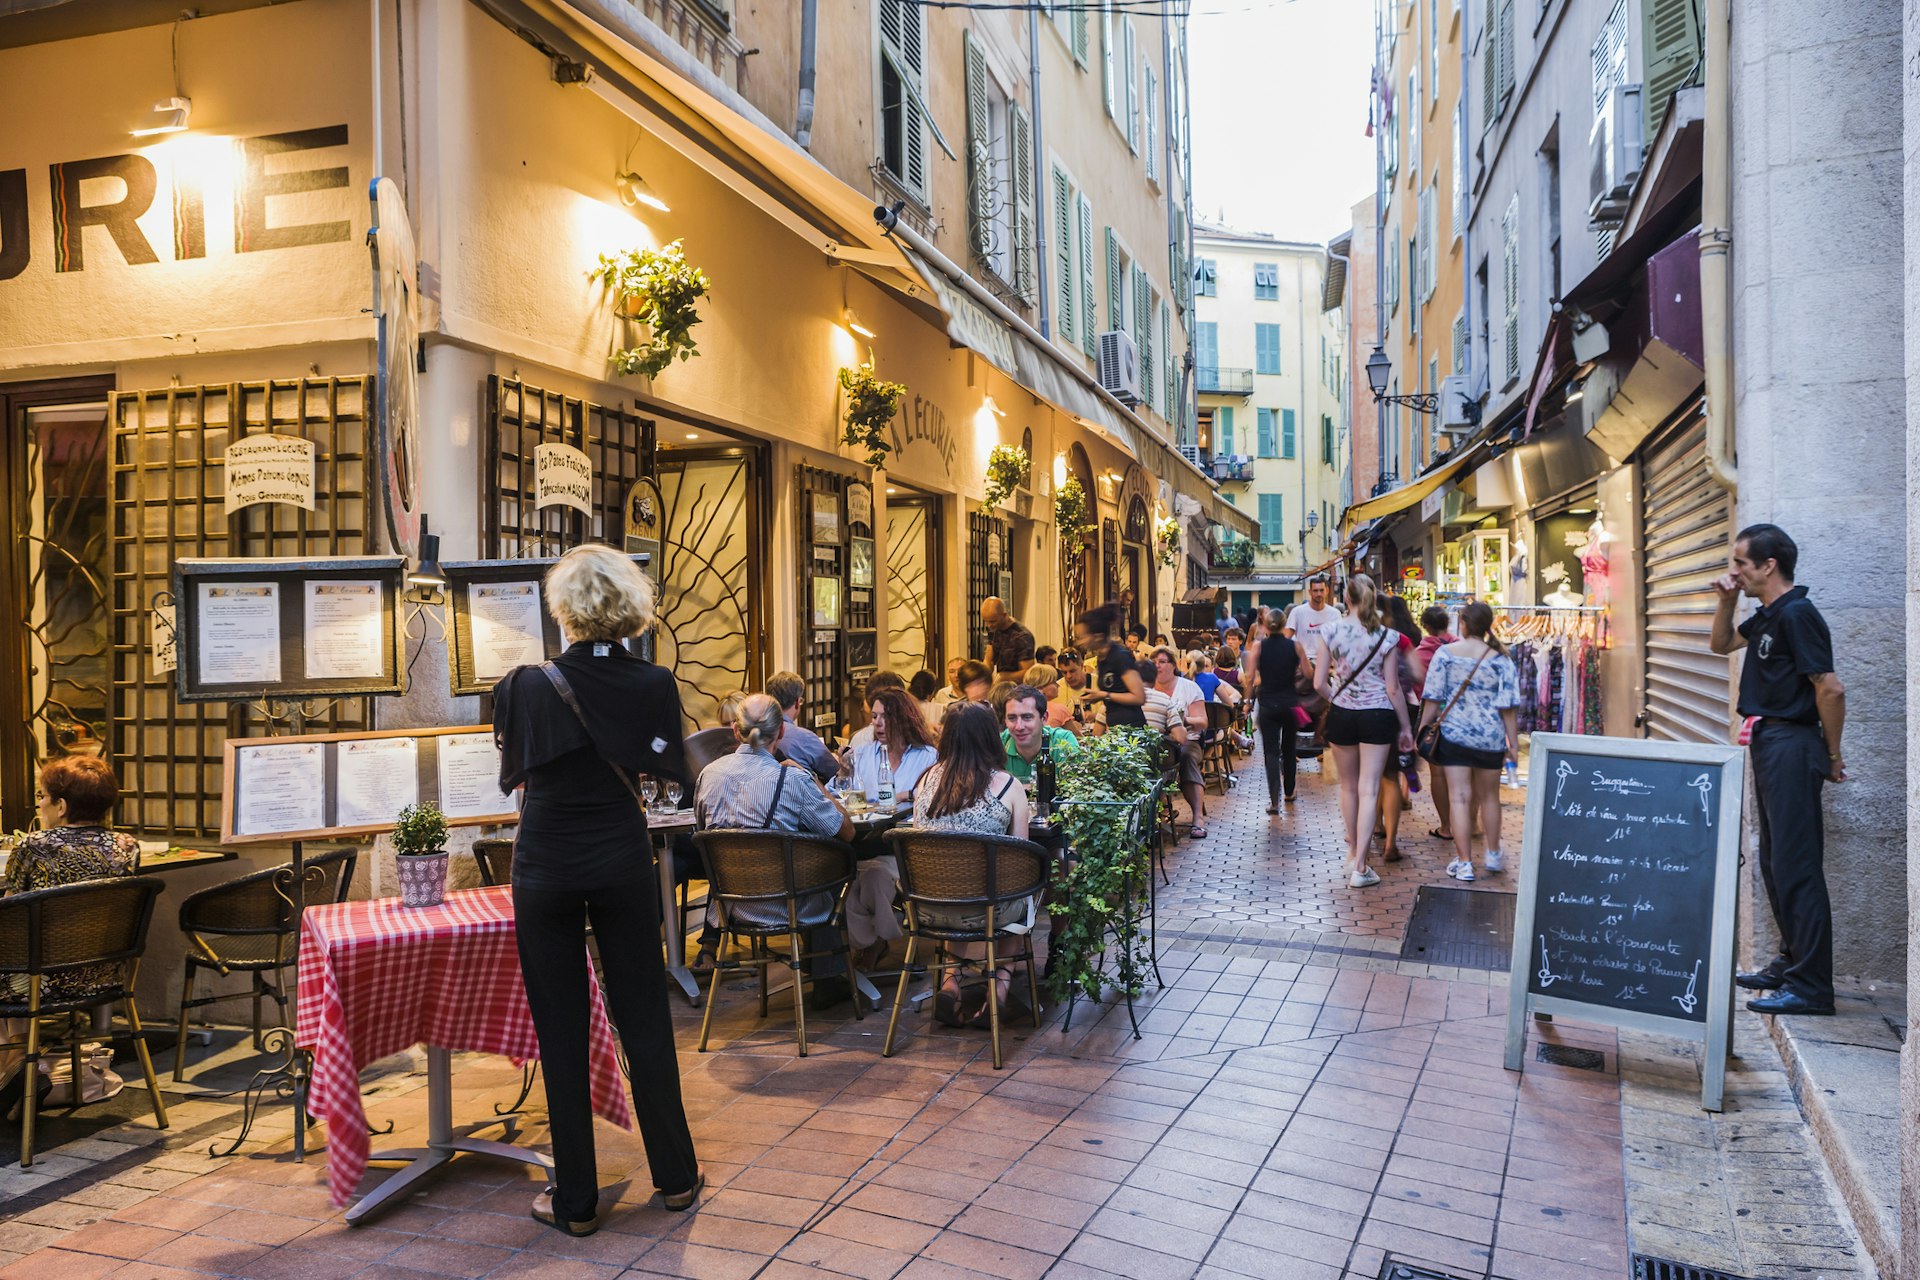 People are seated outside a restaurant in the evening in Vieux Nice, France